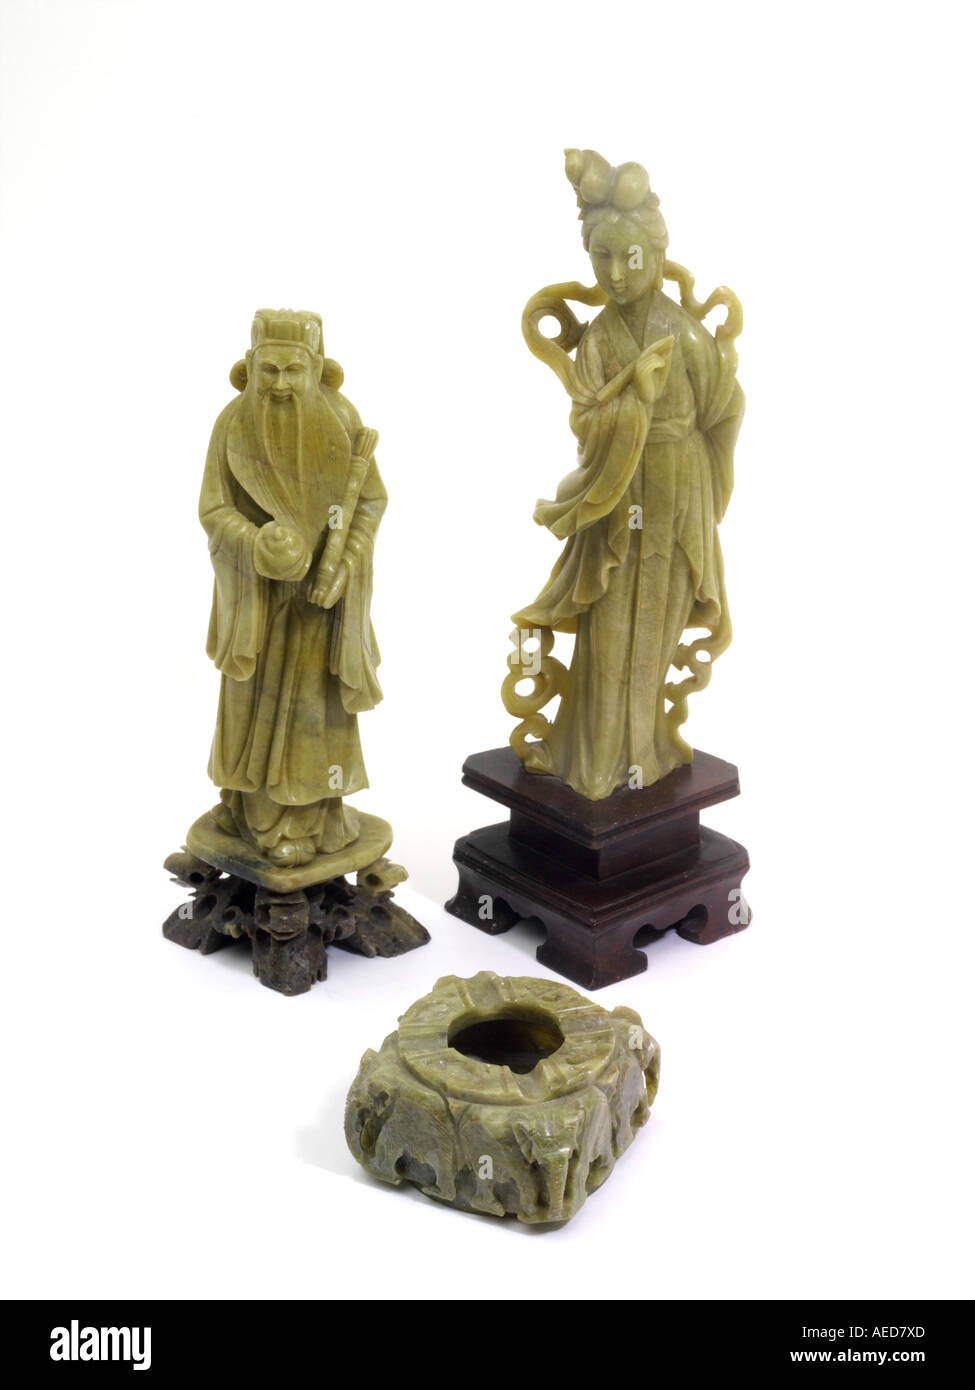 Chinese Jade  Ashtray Jade Jewellery and Sculptures Kuan Yin Bodhisattva of Compassion and Wen Ch’ang Stock Photo